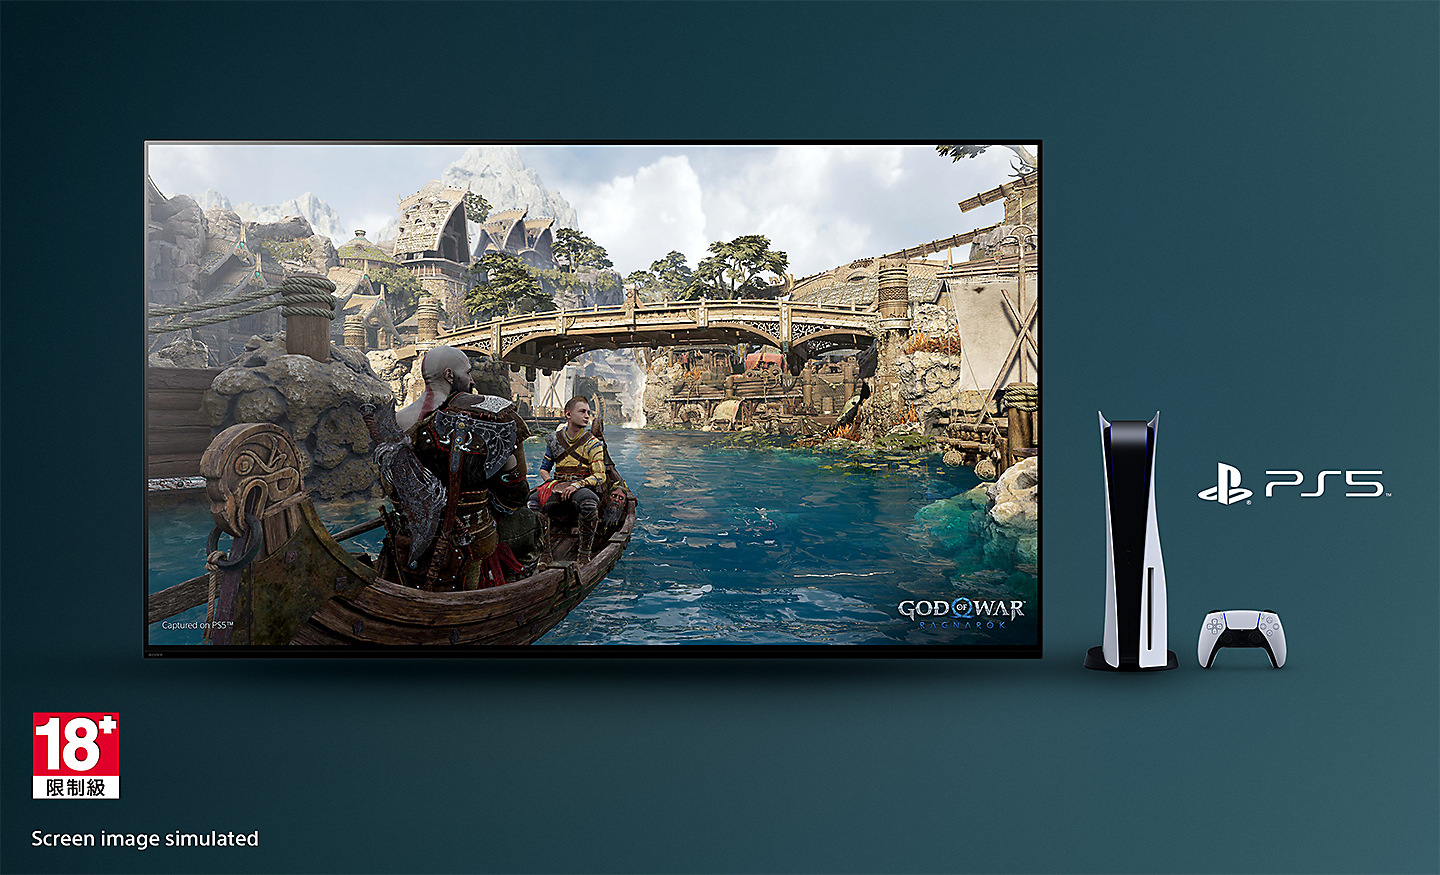 BRAVIA TV with screenshot of God of War: Ragnarok showing a boat on a river and bridge in background with PS5™ console, controller and PS5™ logo to the right of the TV and 18+ logo bottom left